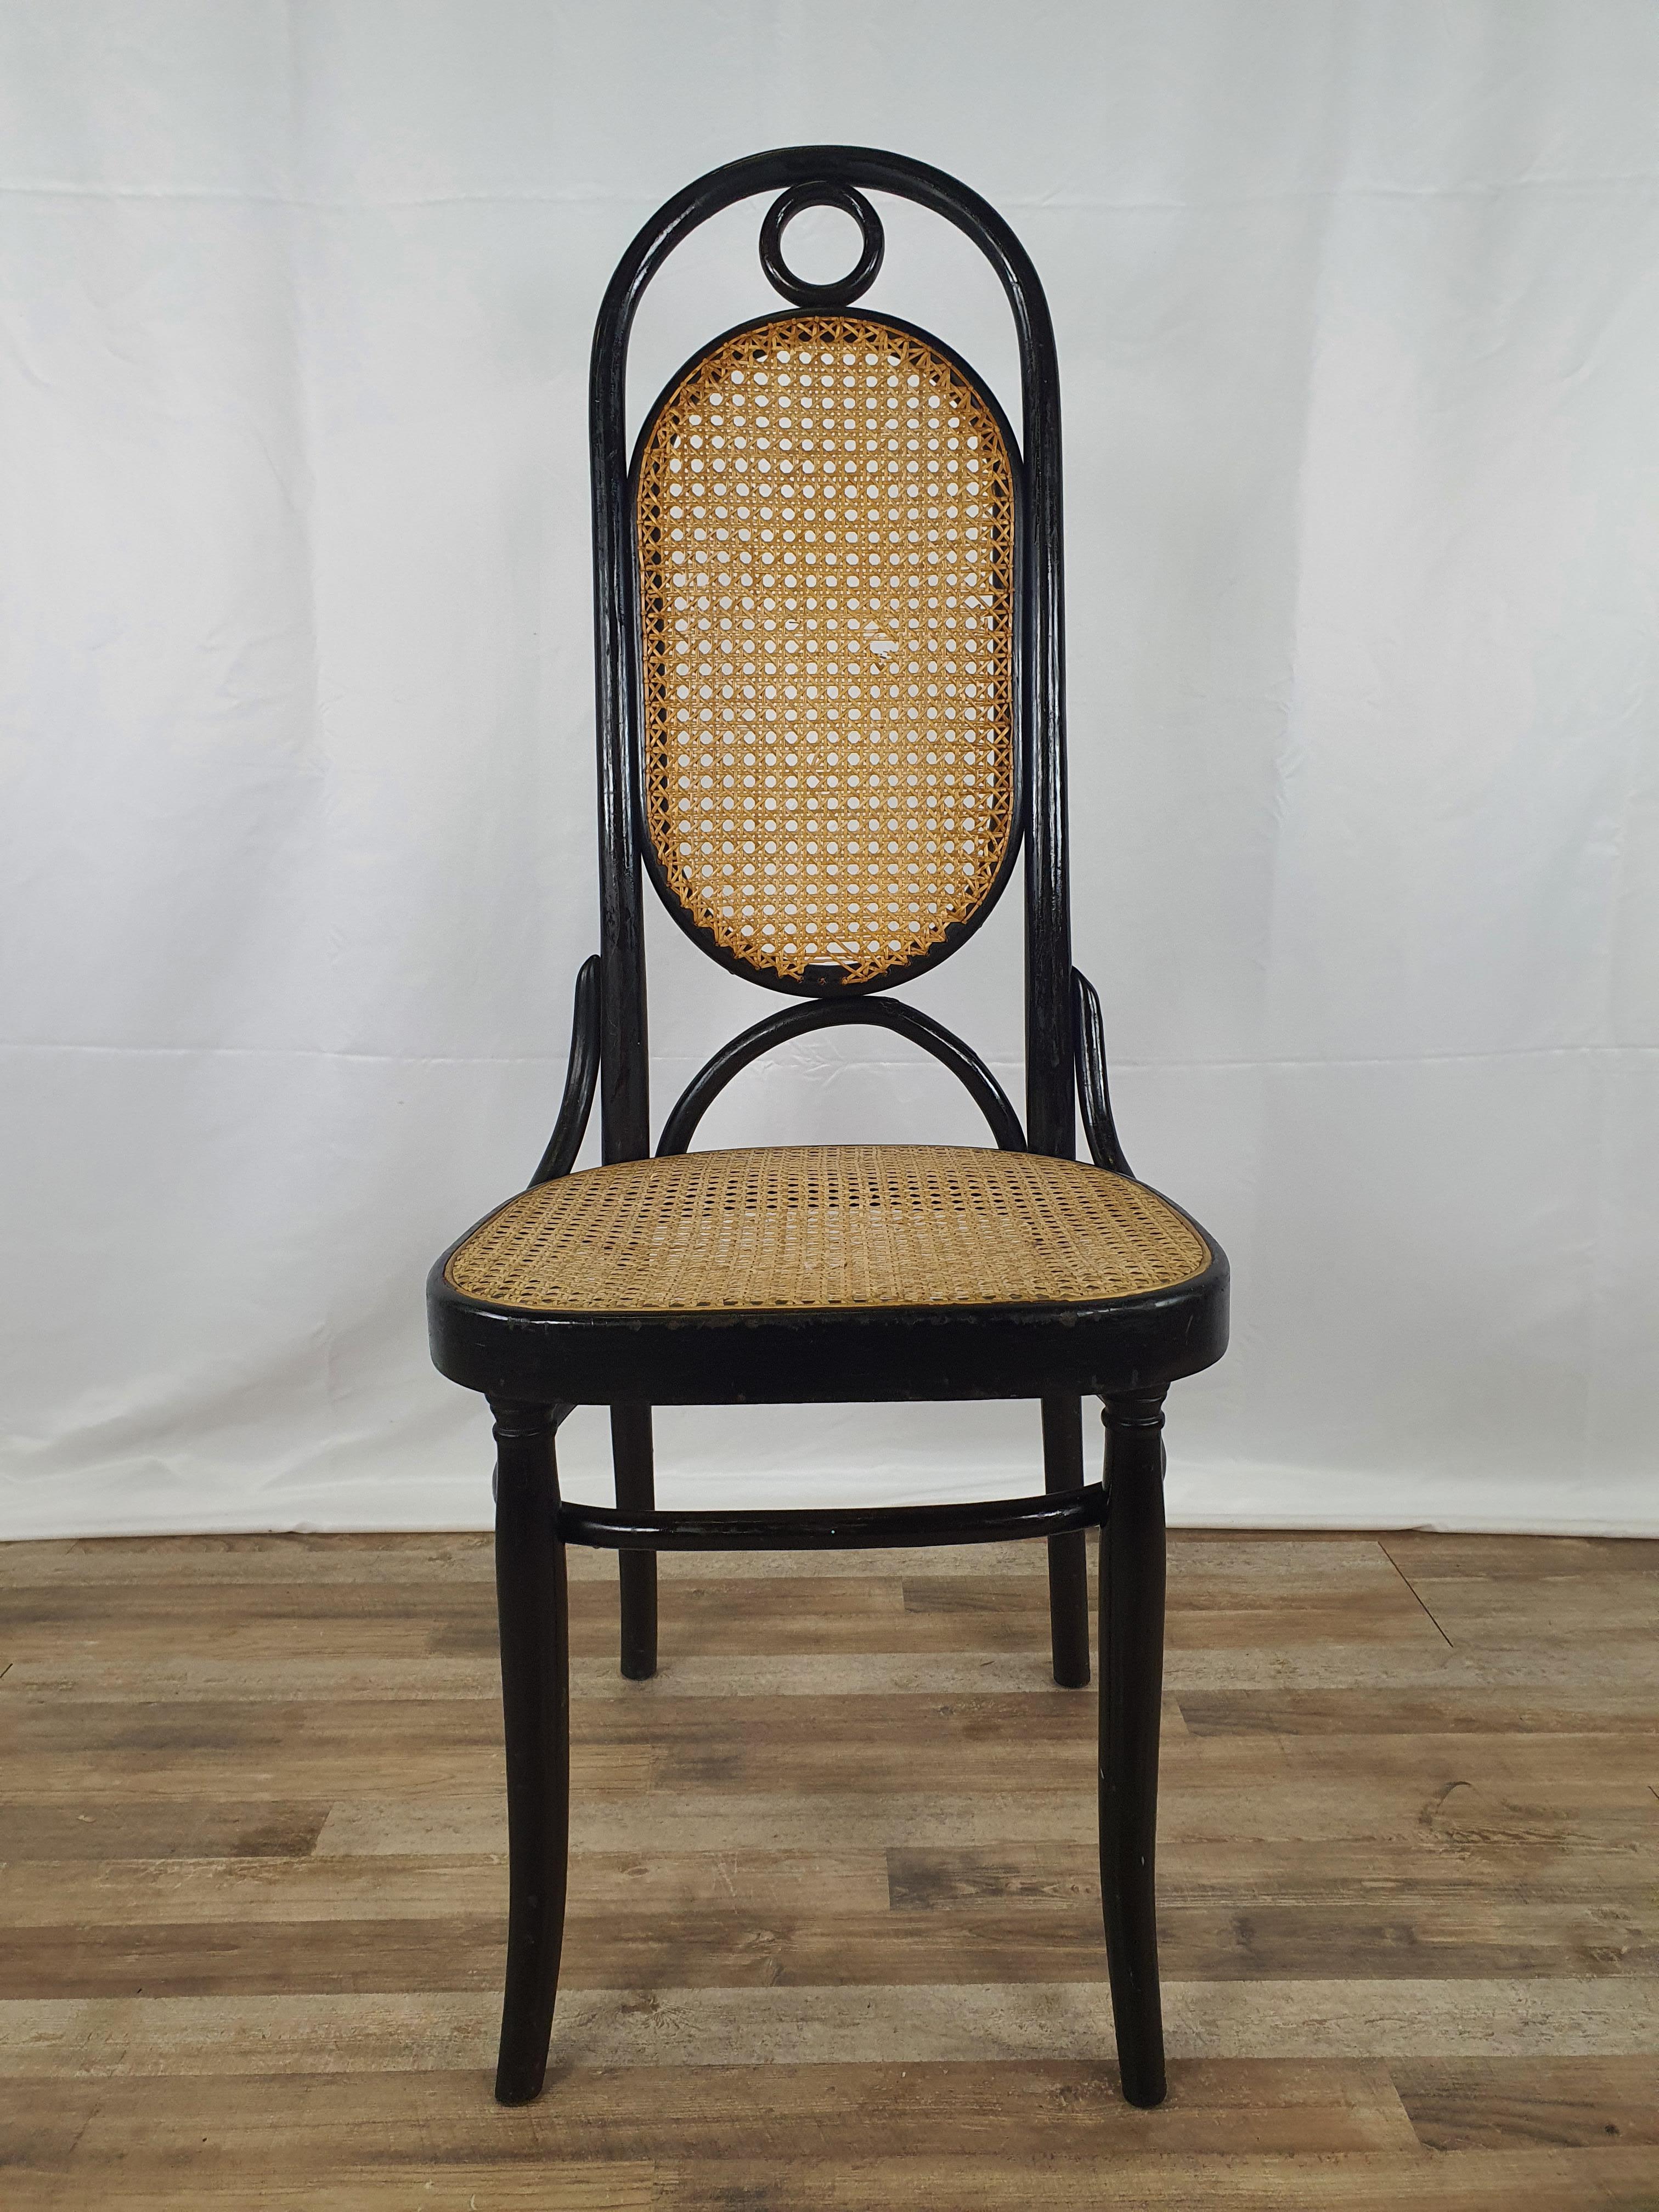 1960s Thonet style chair model n.17, also called 'Cathedral', black lacquered with original period Vienna straw seat and back.

Under the seat it says 